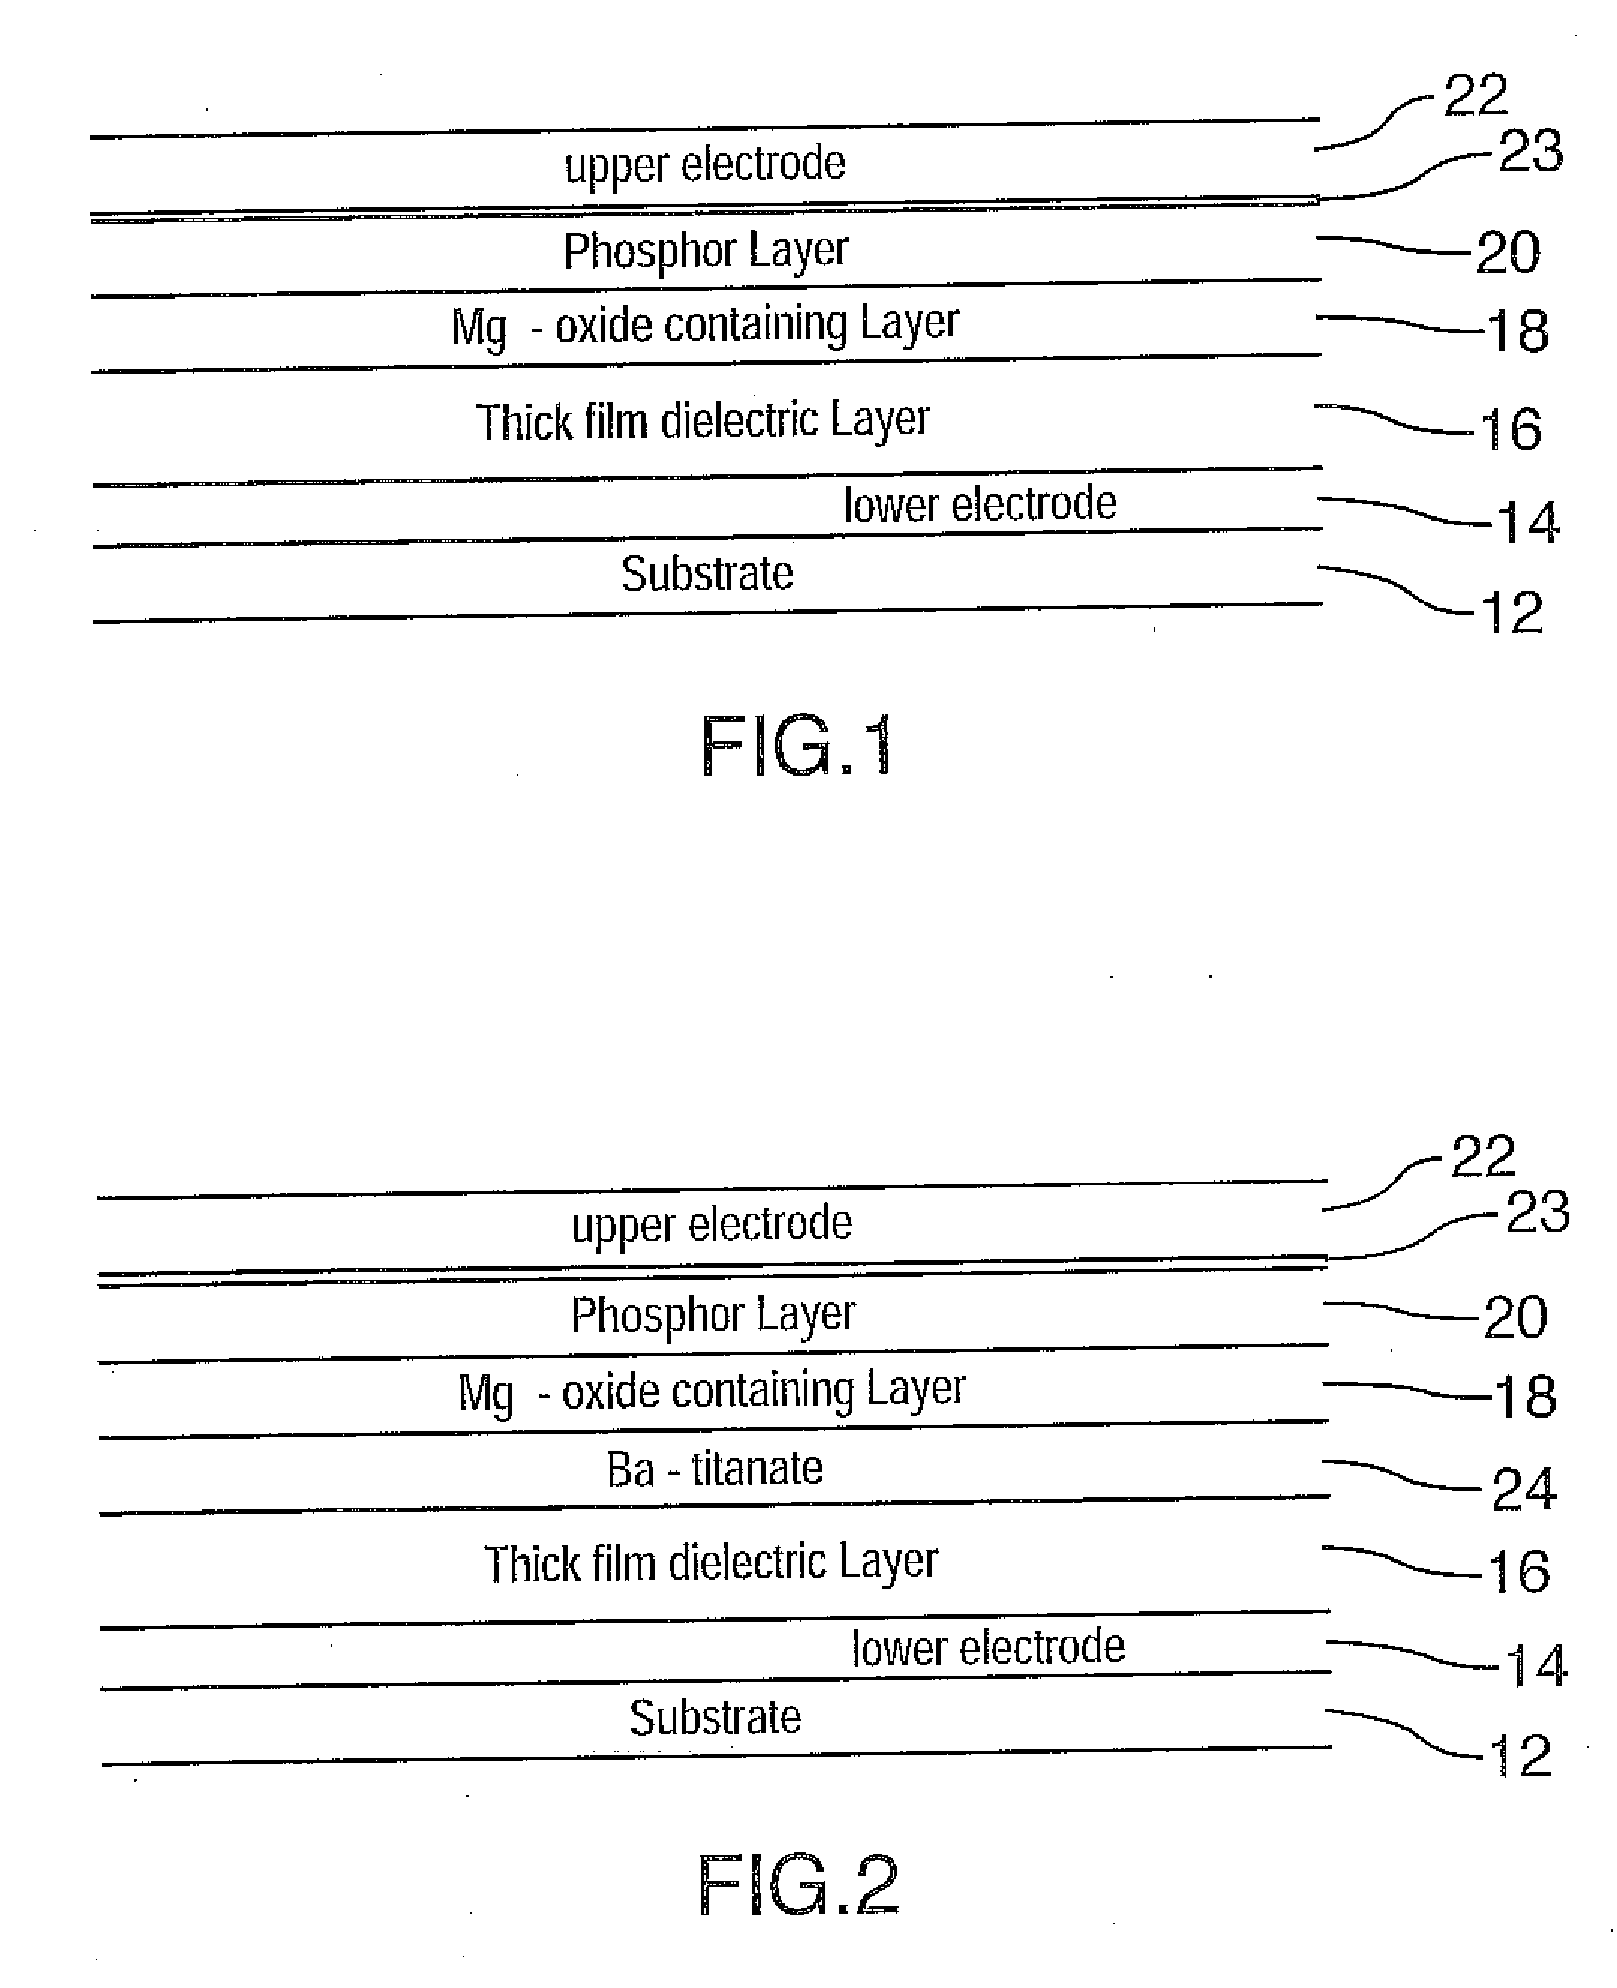 Magnesium oxide-containing barrier layer for thick dielectric electroluminescent displays